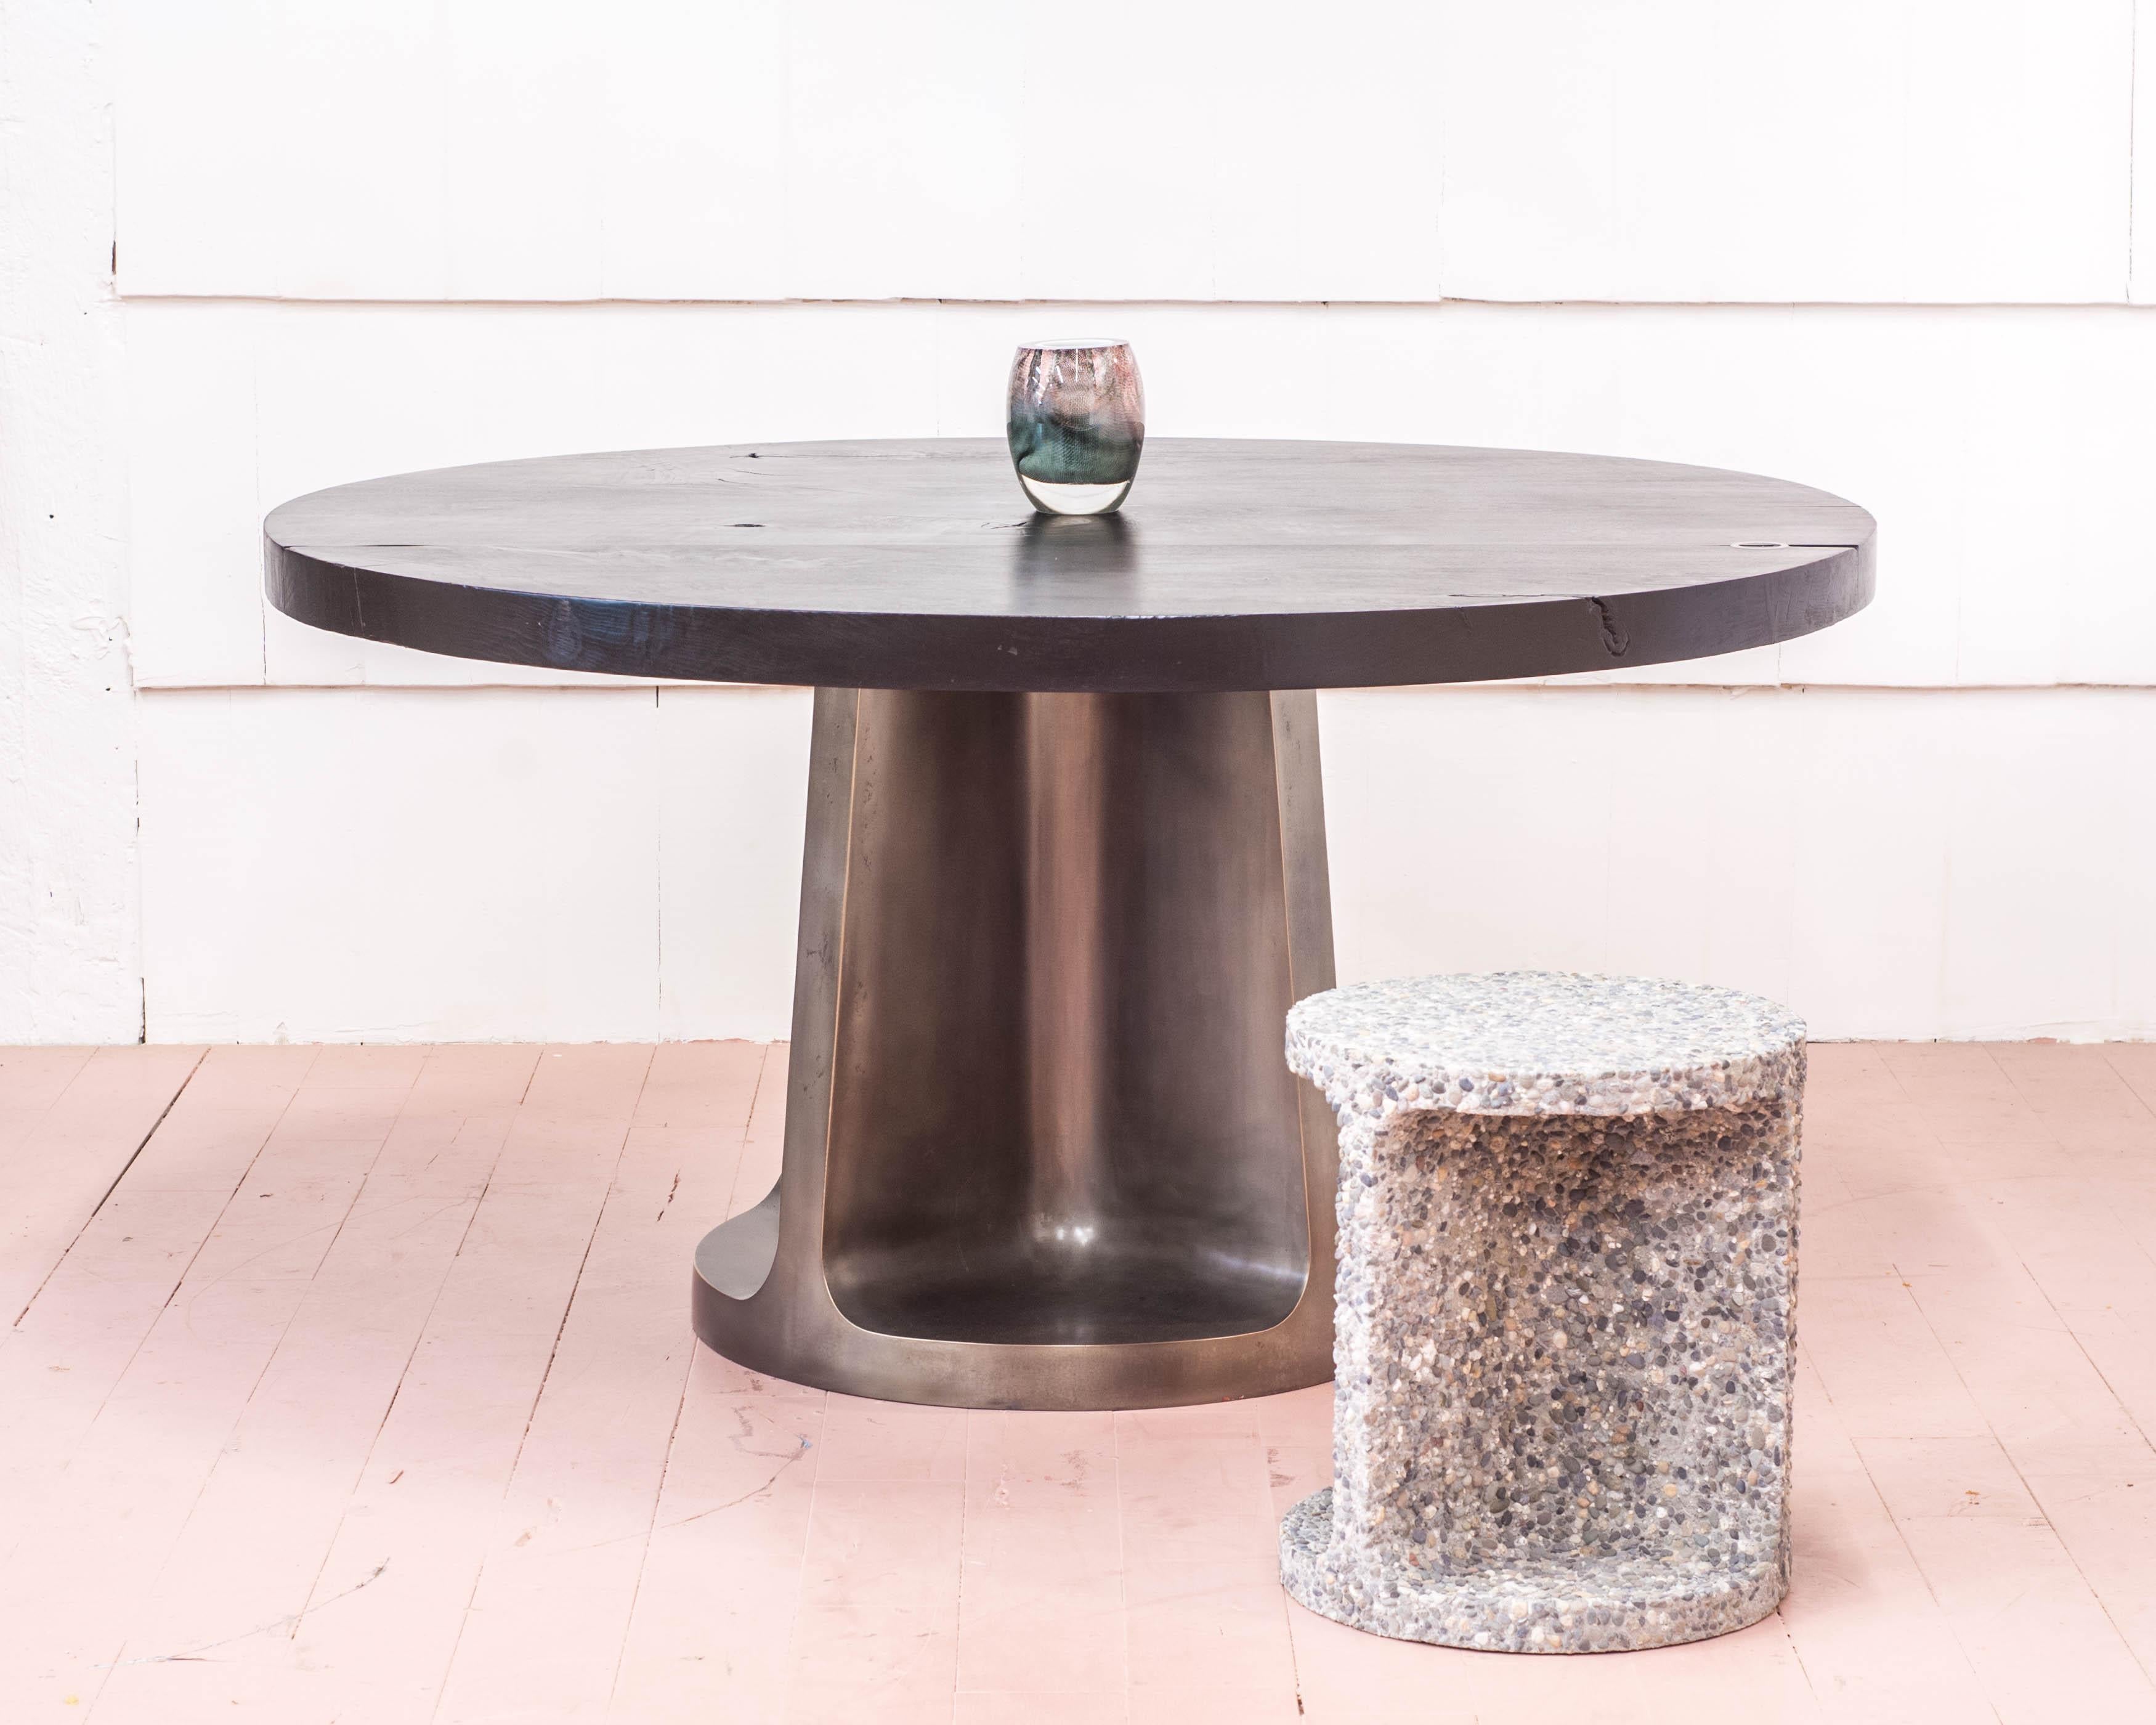 Megalithic cast bronze dining table with a variety of tops and finishes.

Our range of altar-like work aims to explore both contemporary and ancient columnar structures.